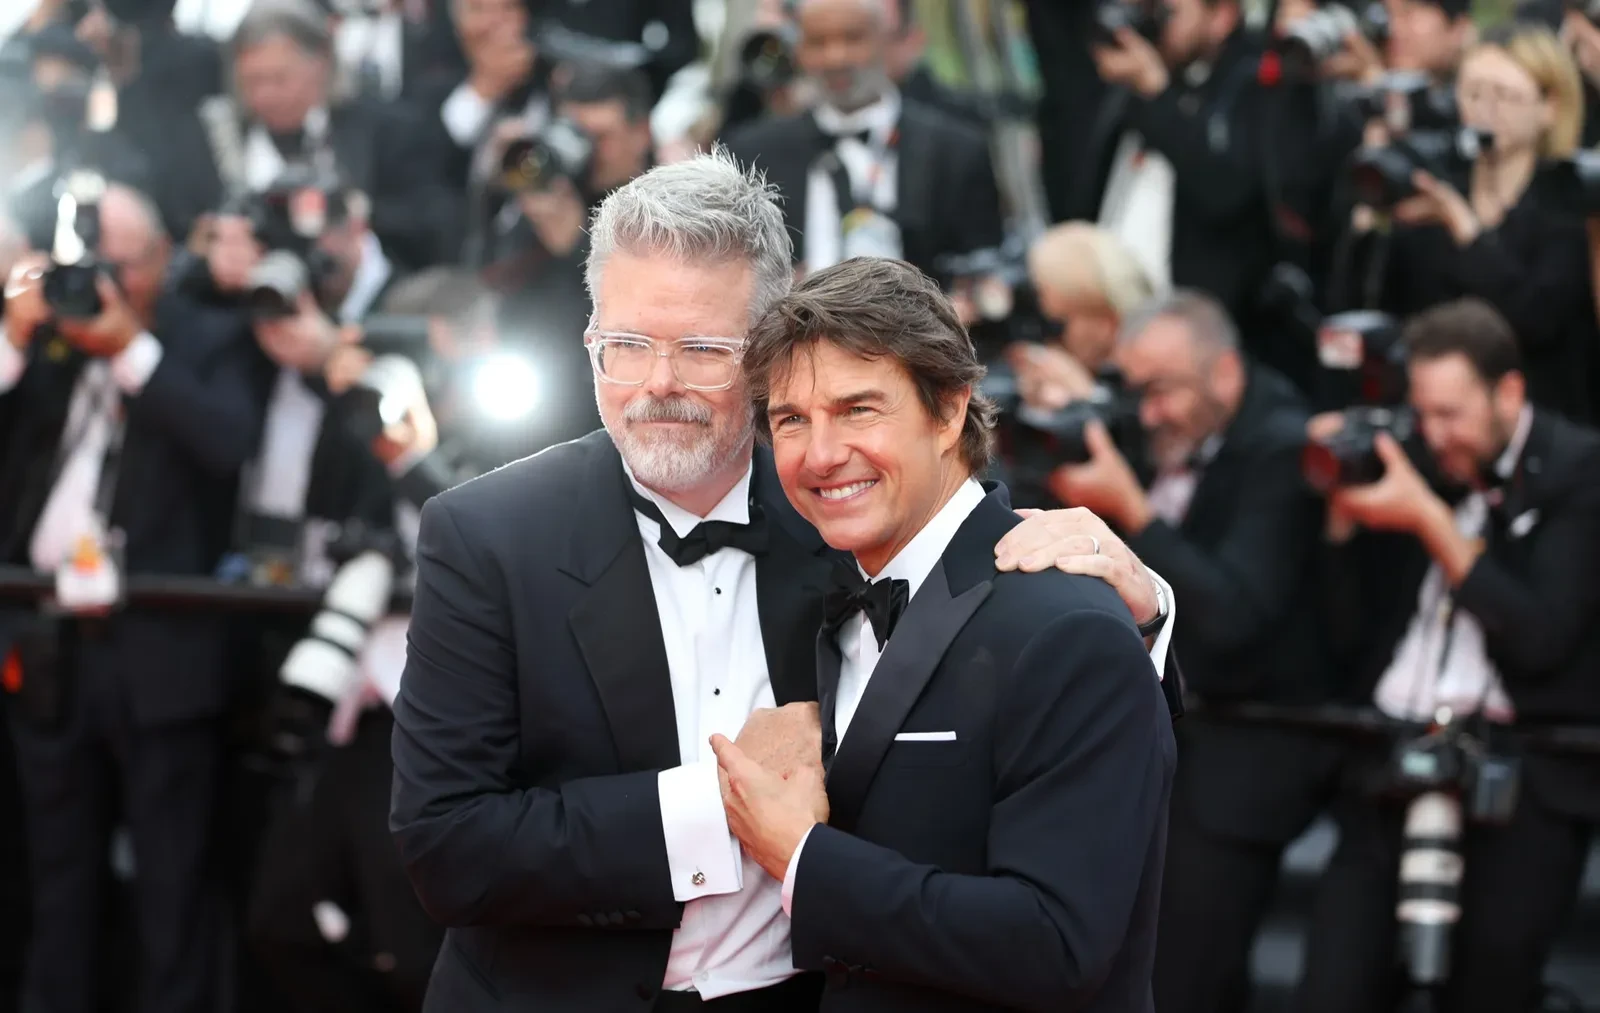 Christopher McQuarrie and Tom Cruise